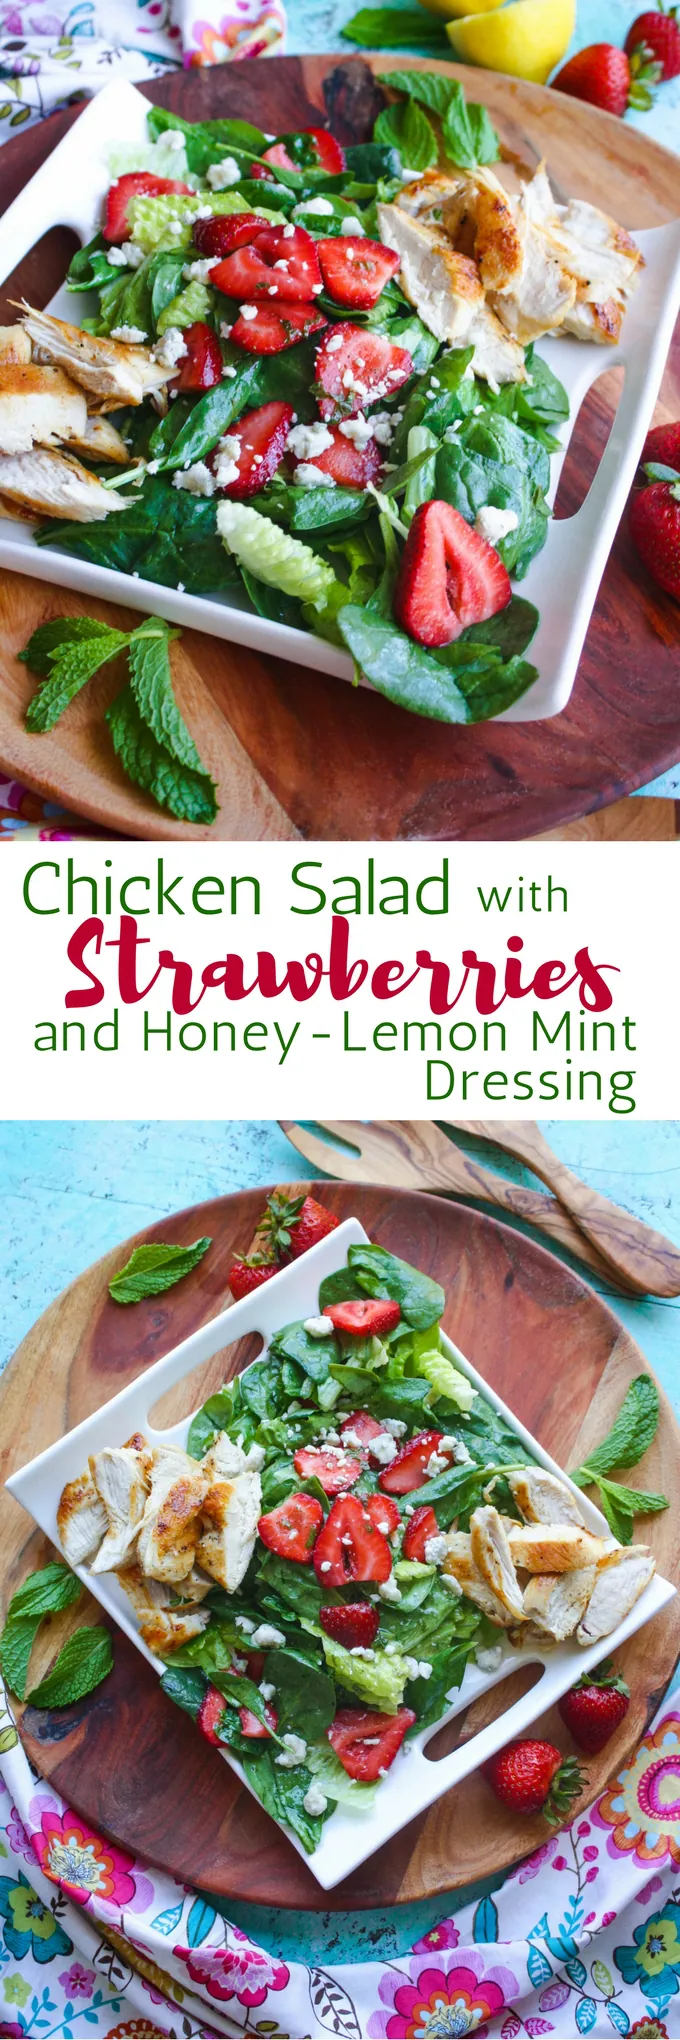 Chicken Salad with Strawberries and Honey-Lemon Mint Dressing is a no-fuss meal perfect for the summer. This salad is filling and you'll love the flavors and colors!